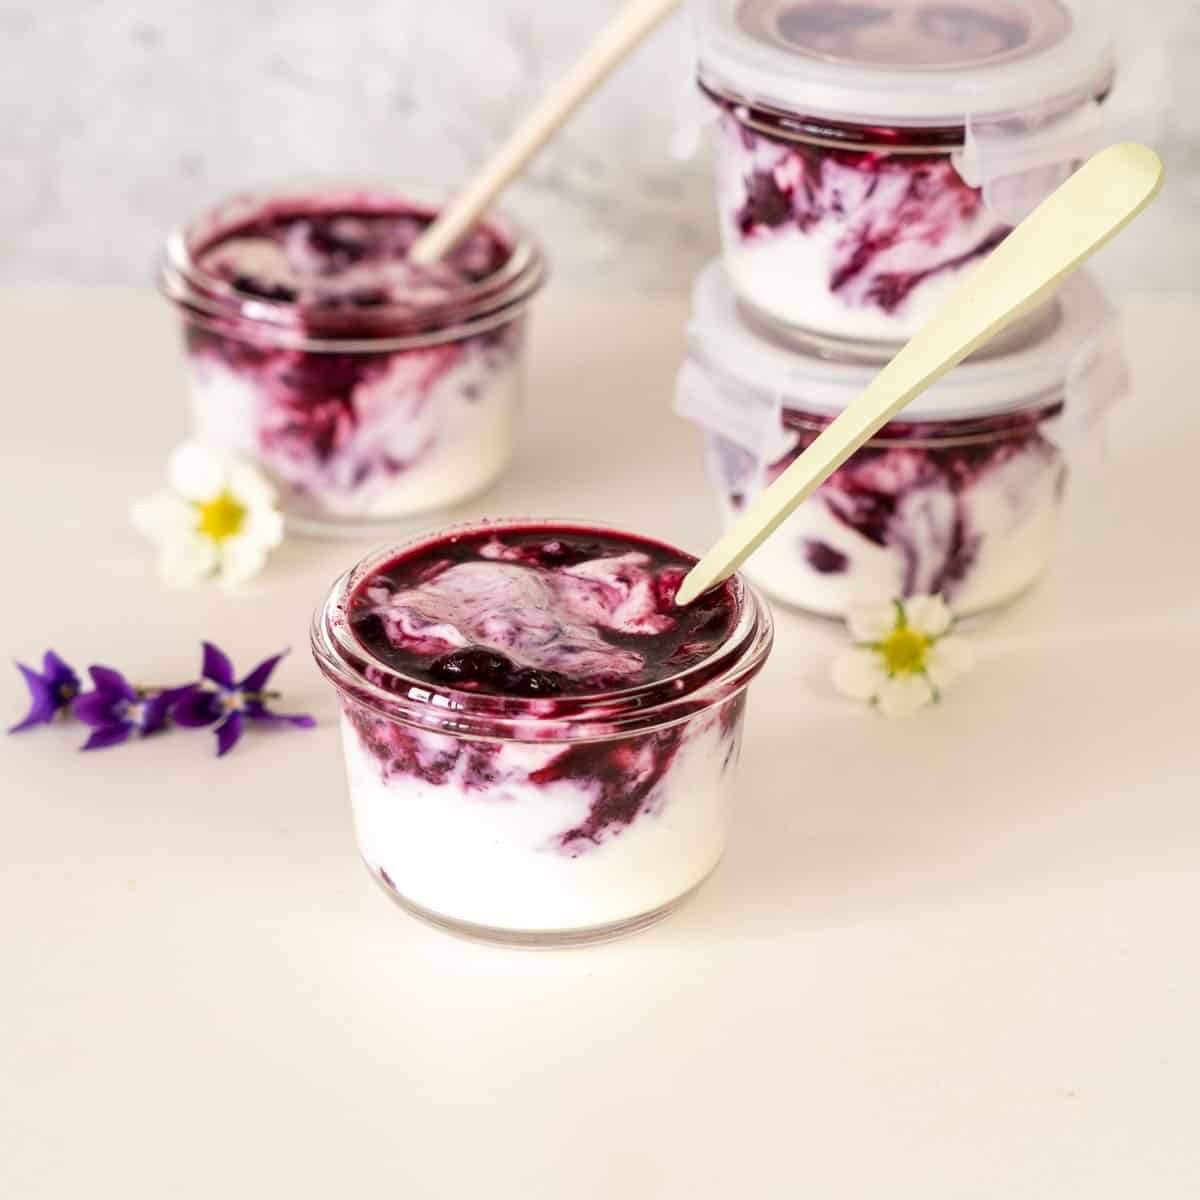 Blueberry yogurt in small glass jars on a bench top scattered with white and purple flowers.